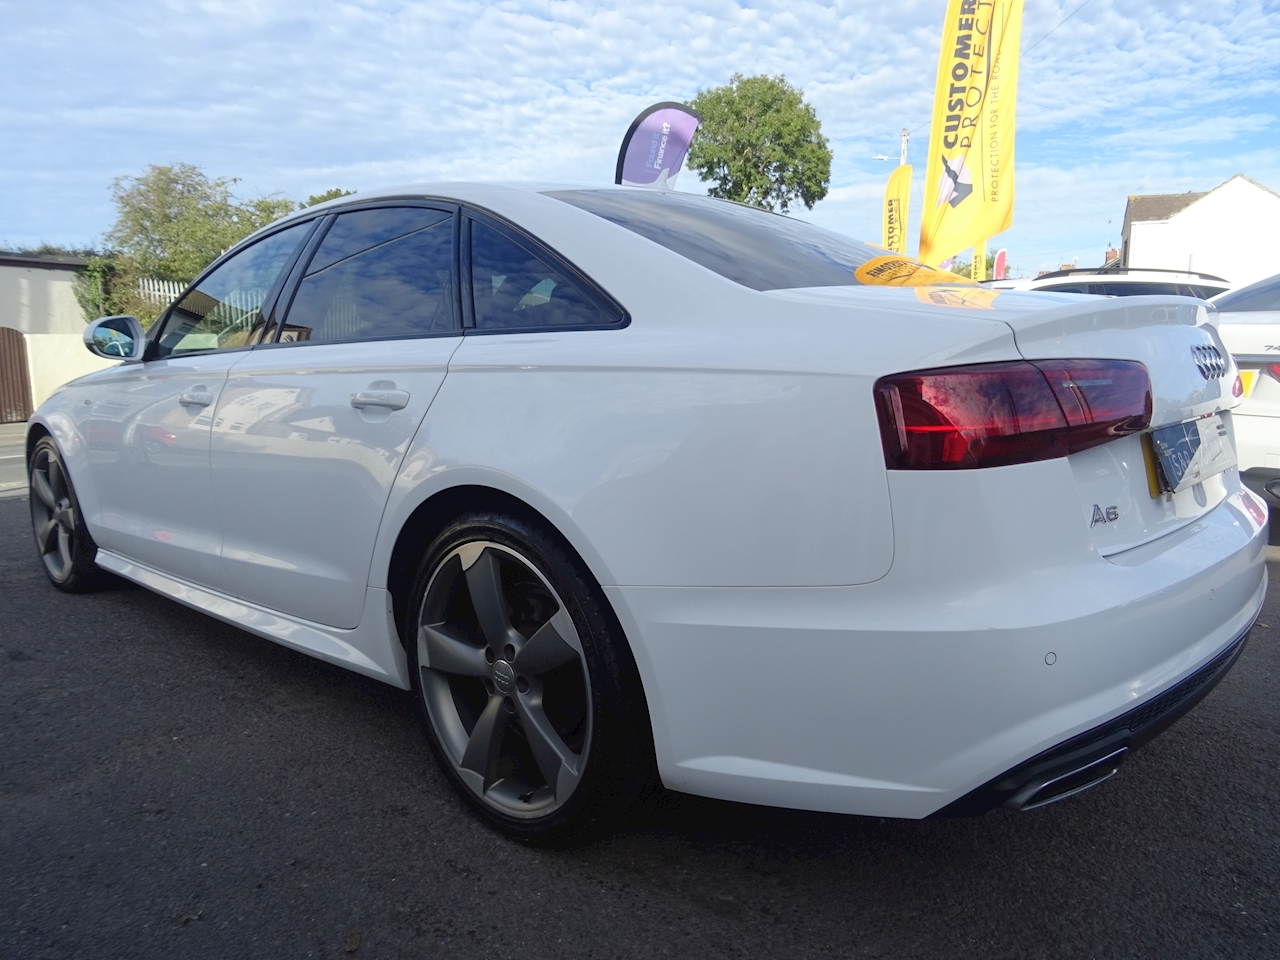 A6 Saloon 2.0 TDI ultra Black Edition Saloon 4dr Diesel S Tronic (s/s) (190 ps)